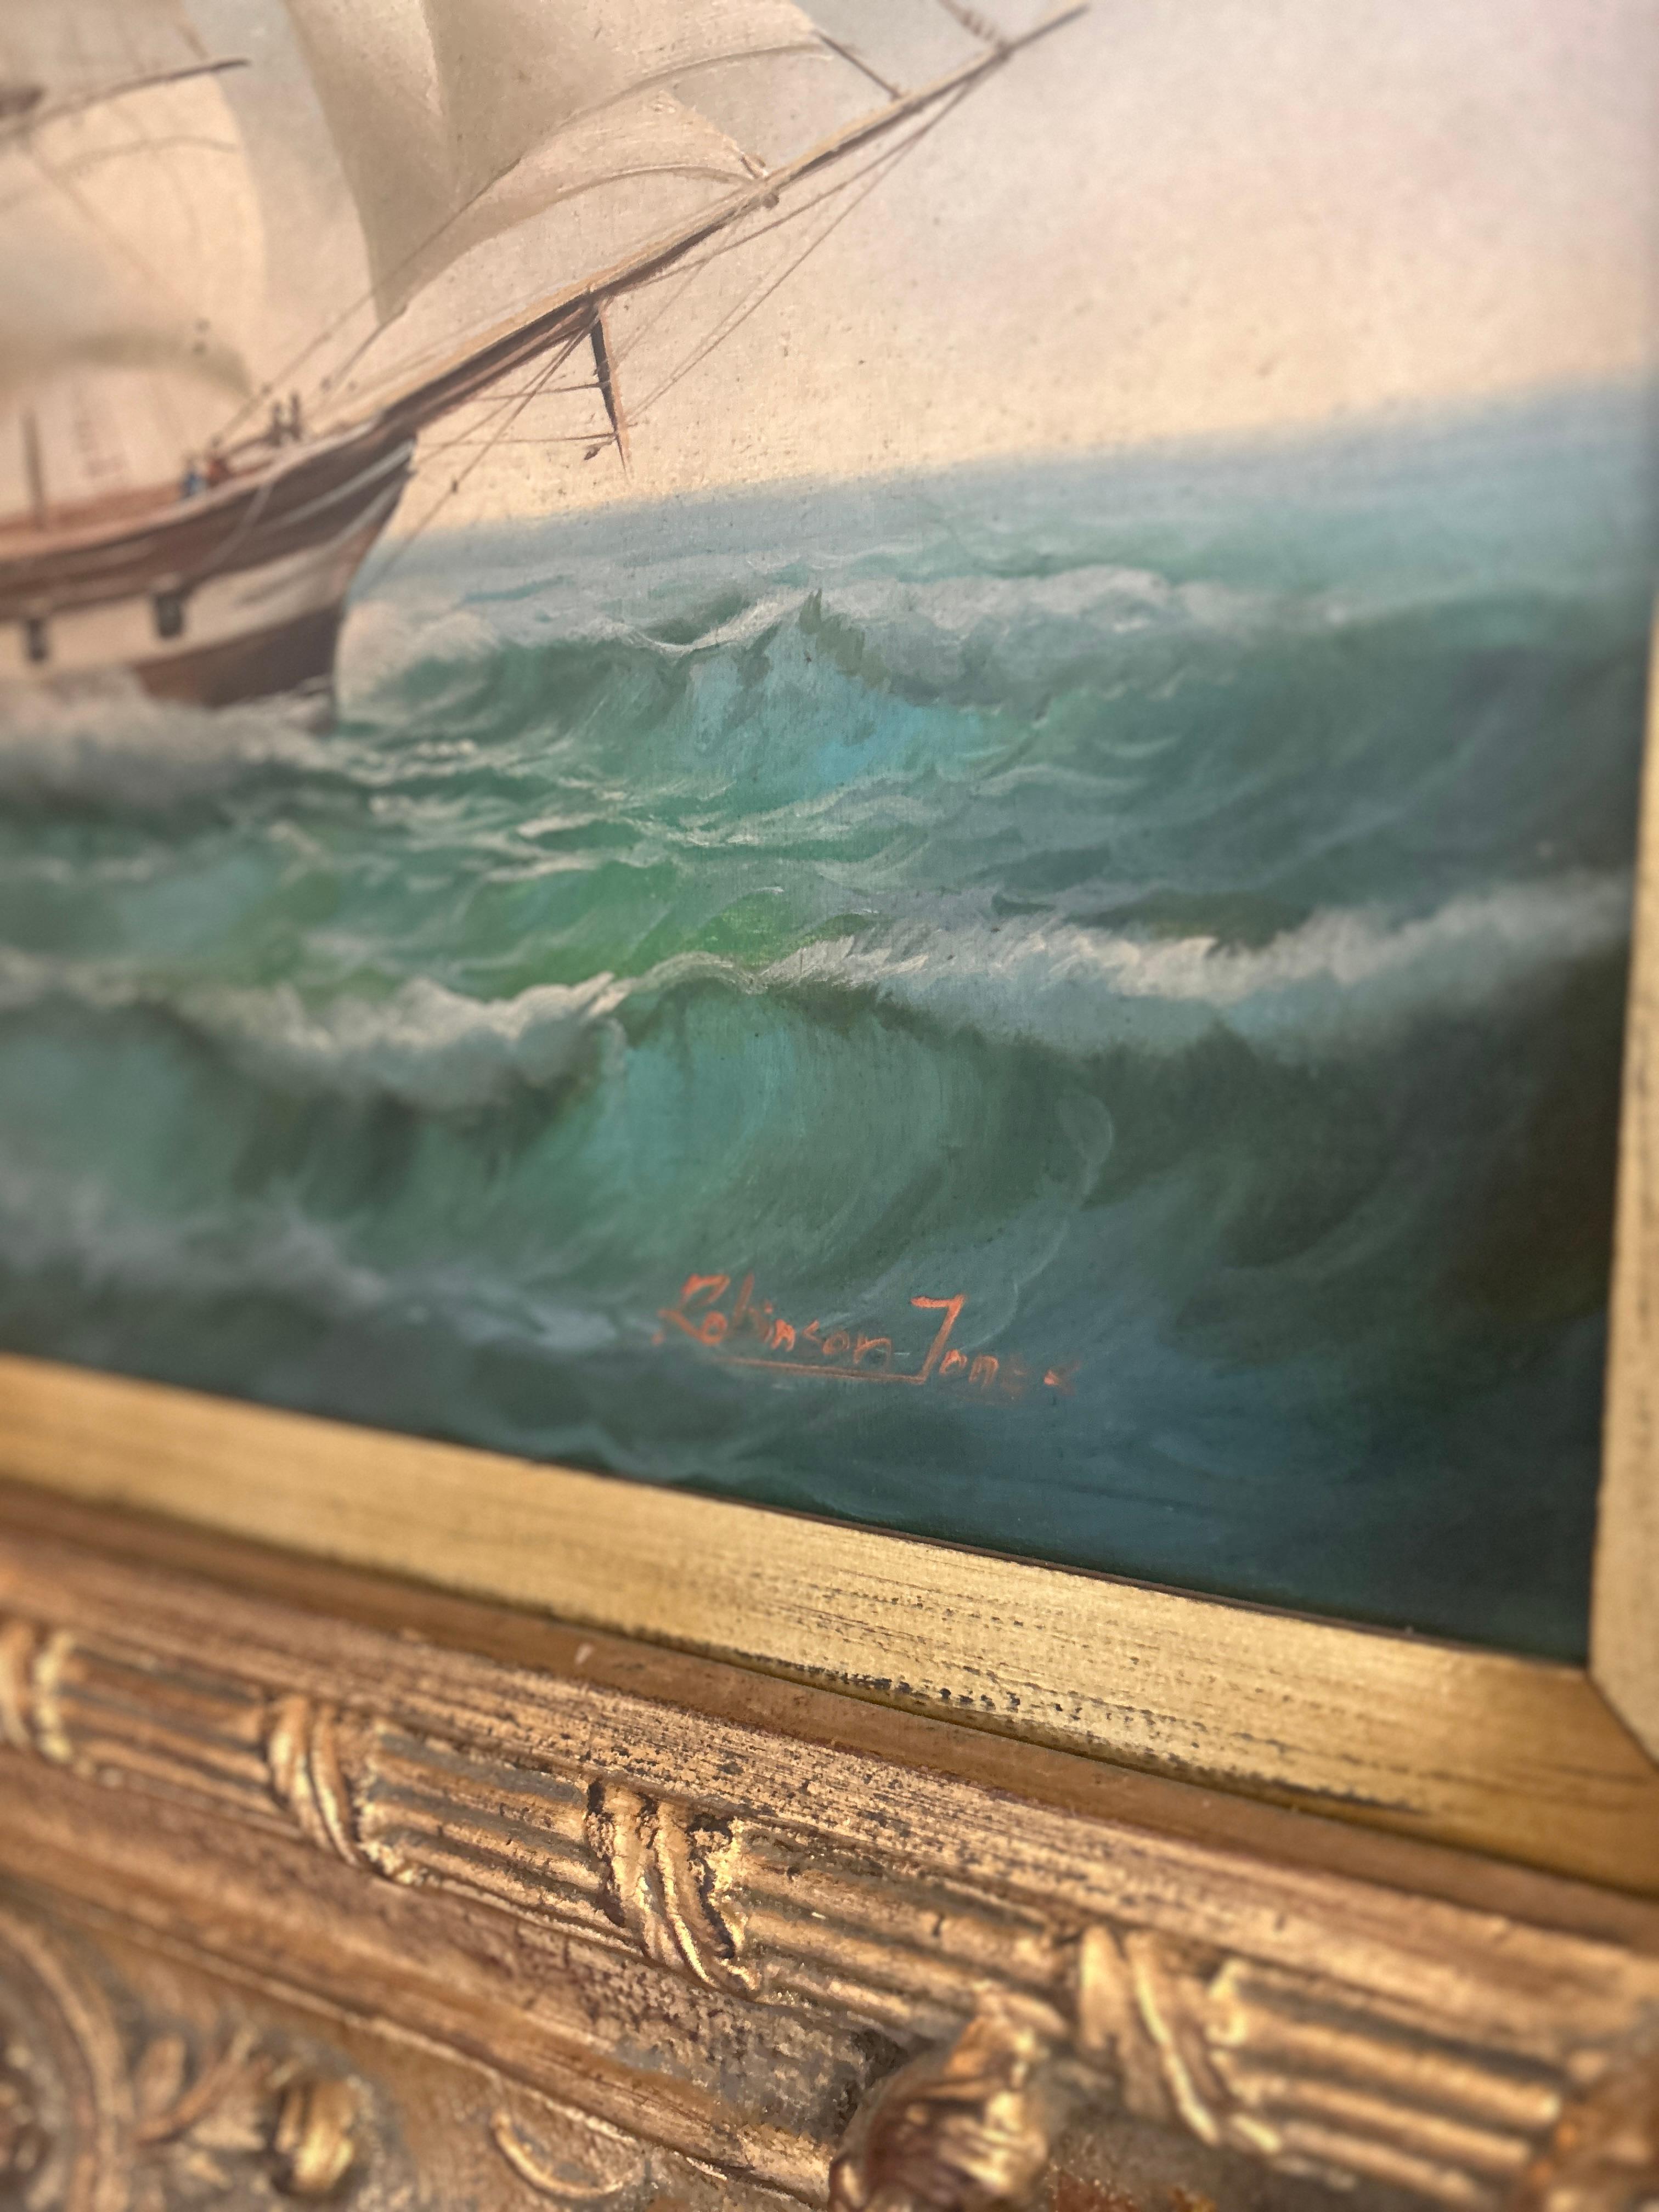 Introducing a stunning oil painting by renowned English artist Robinson Jones, born in the 19th century. This exceptional artwork captures the essence of an American sailing vessel in all its glory, beautifully rendered in the traditional English